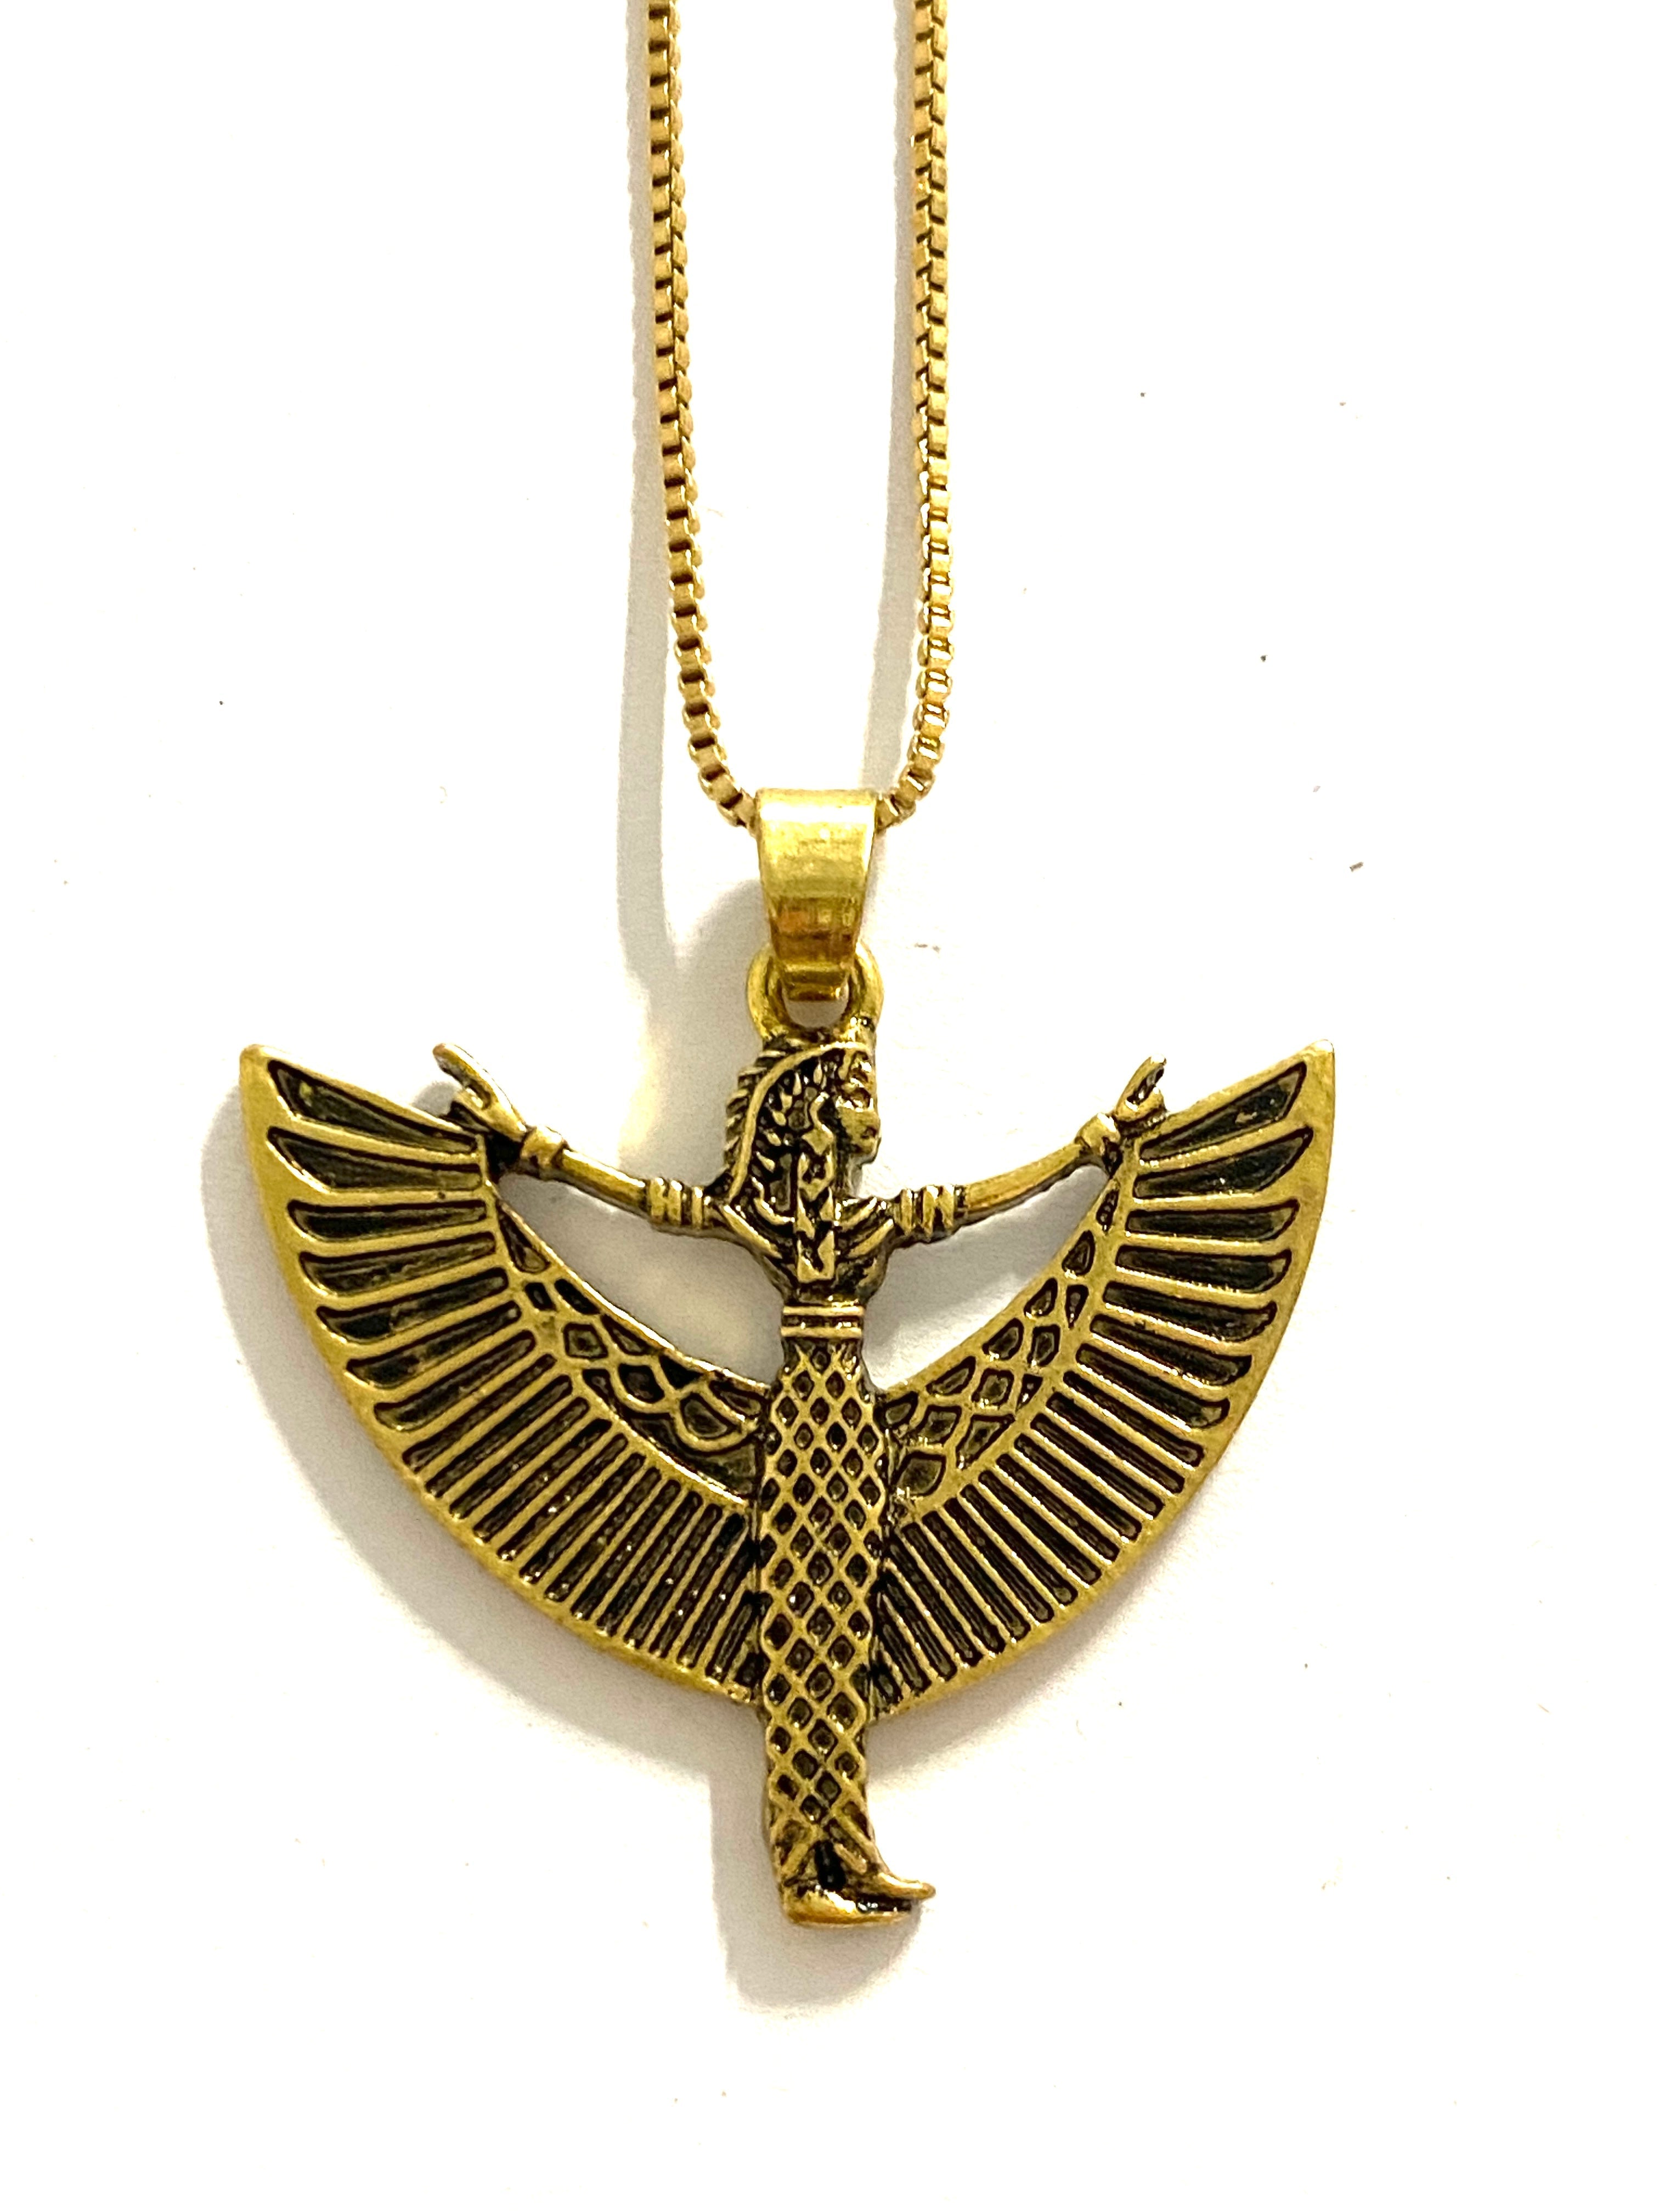 Maat Egyptian Goddess Necklace by Boho Gal Jewelry